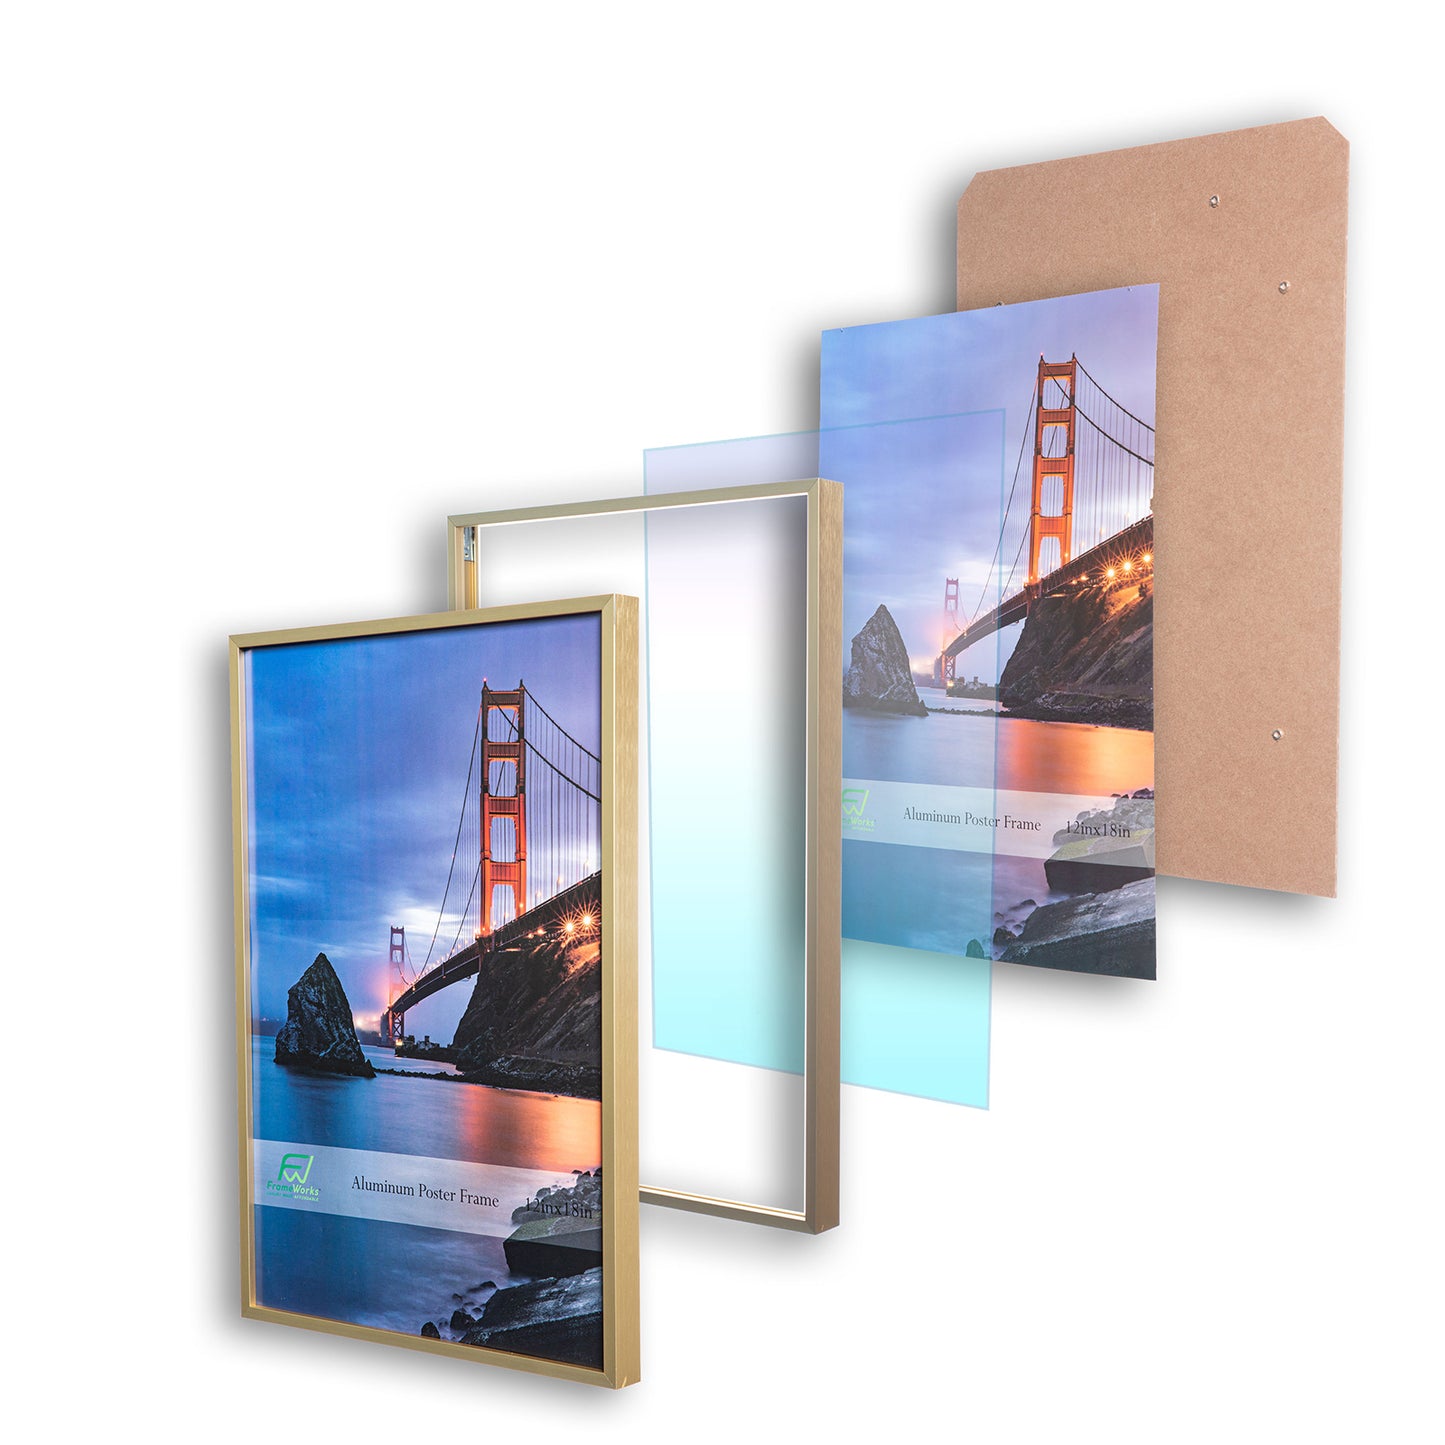 12" x 18" Gold Brushed Aluminum Poster Picture Frame with Plexiglass